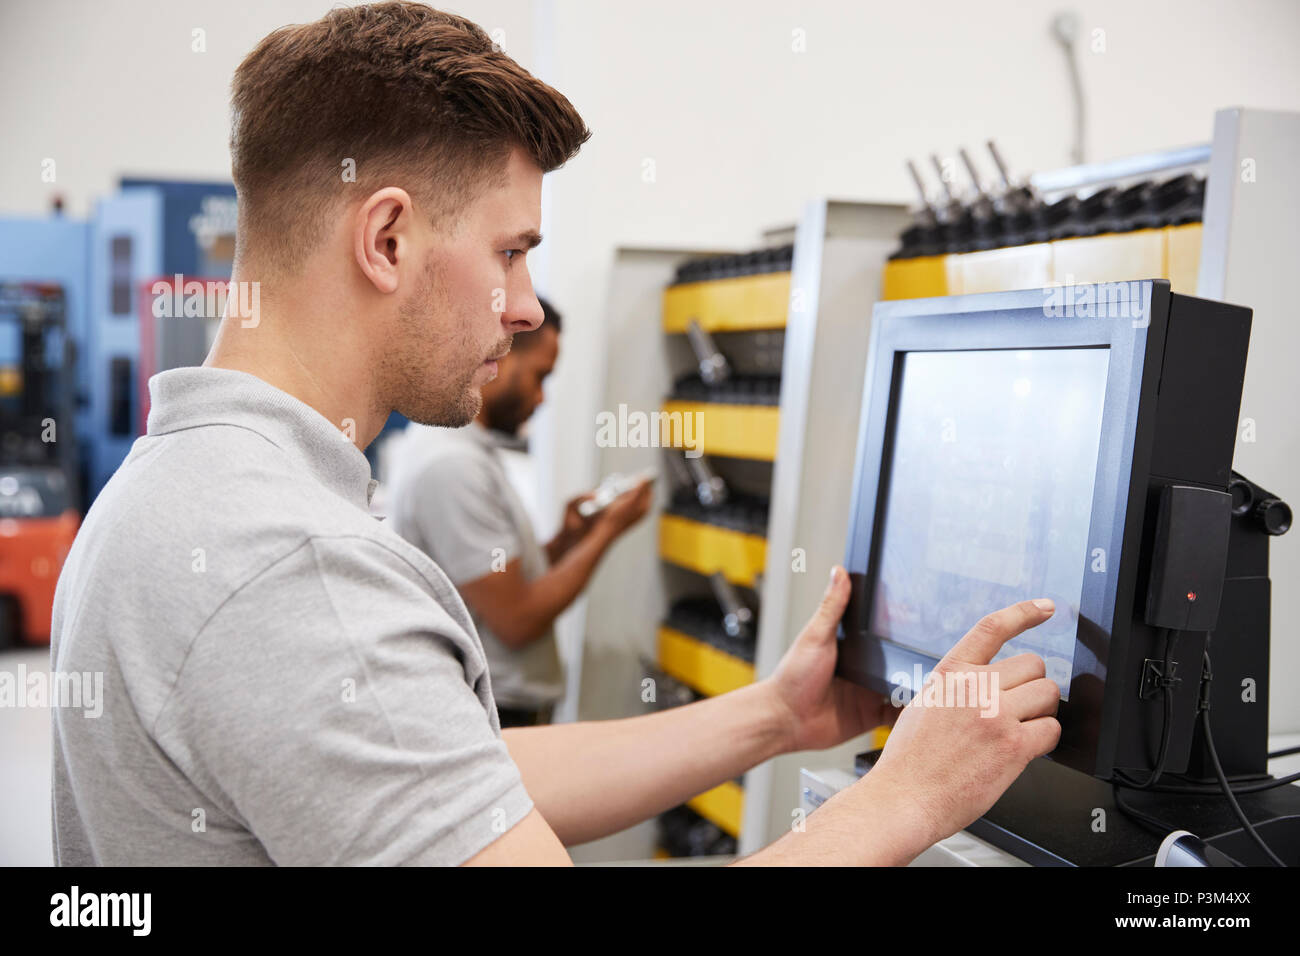 Engineers Selecting Tools For Use On Machinery In Factory Stock Photo